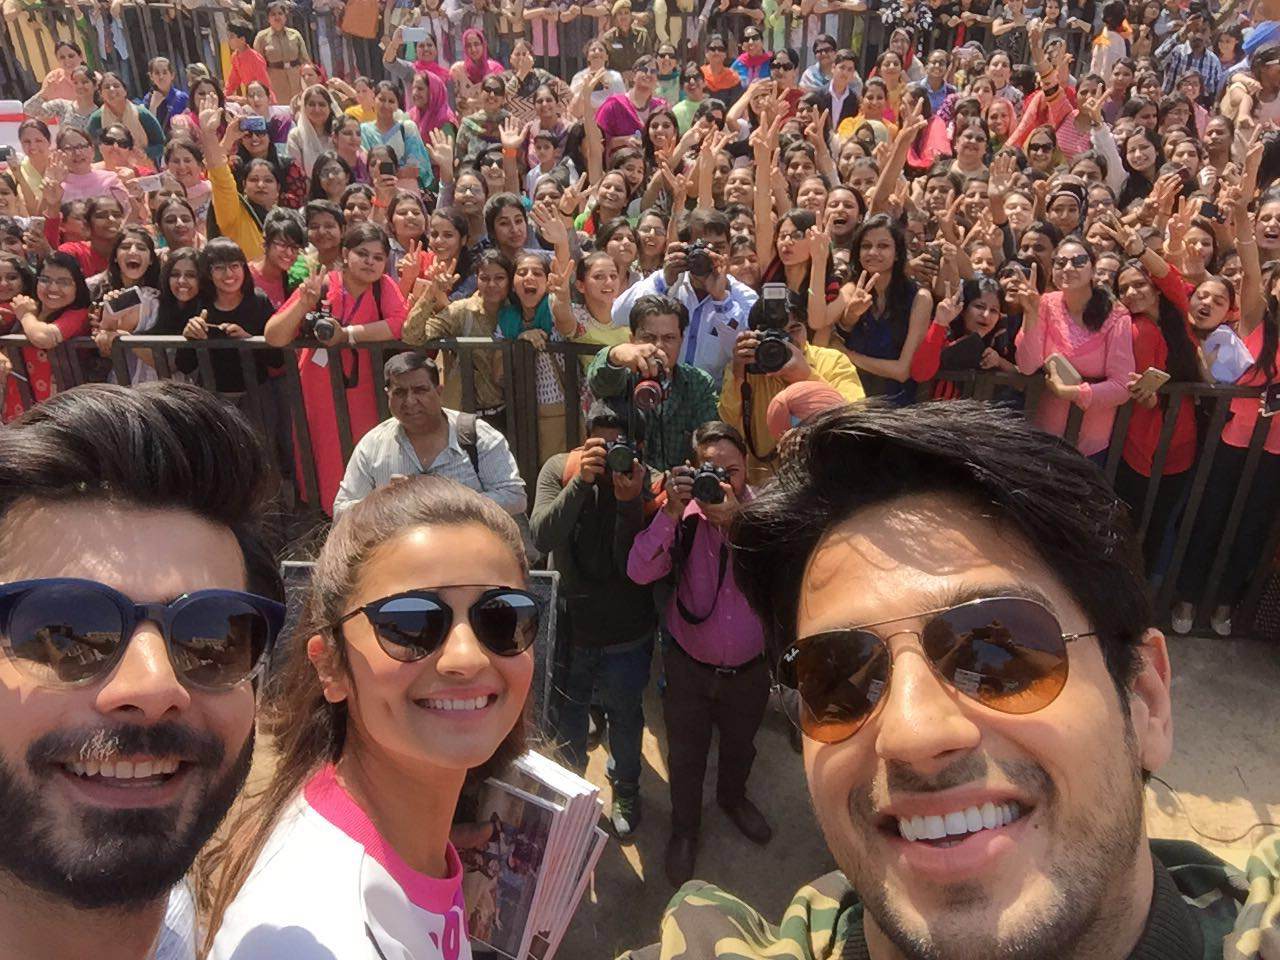 Siddharth Malhotra, Fawad Khan and Alia Bhatt promote Kapoor and Sons at a college in Chandigarh